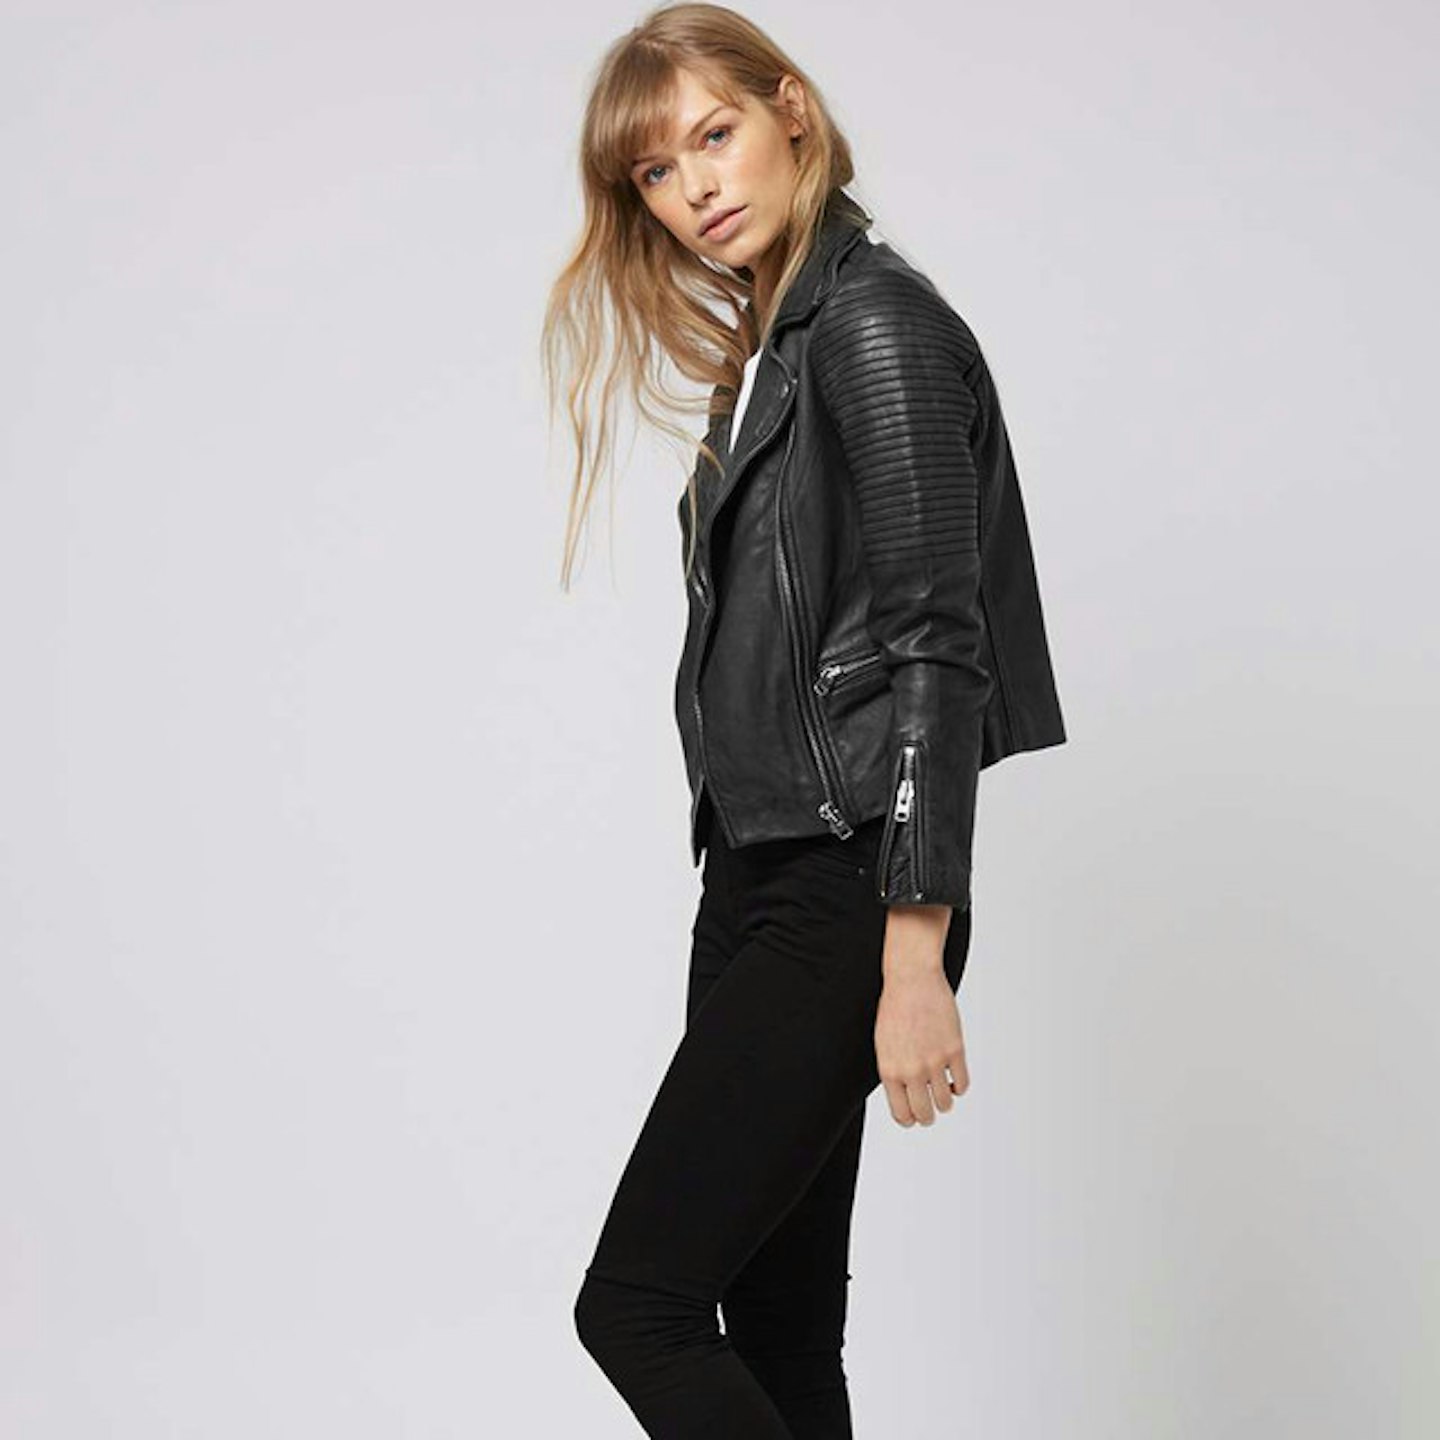 Affordable leather jackets 